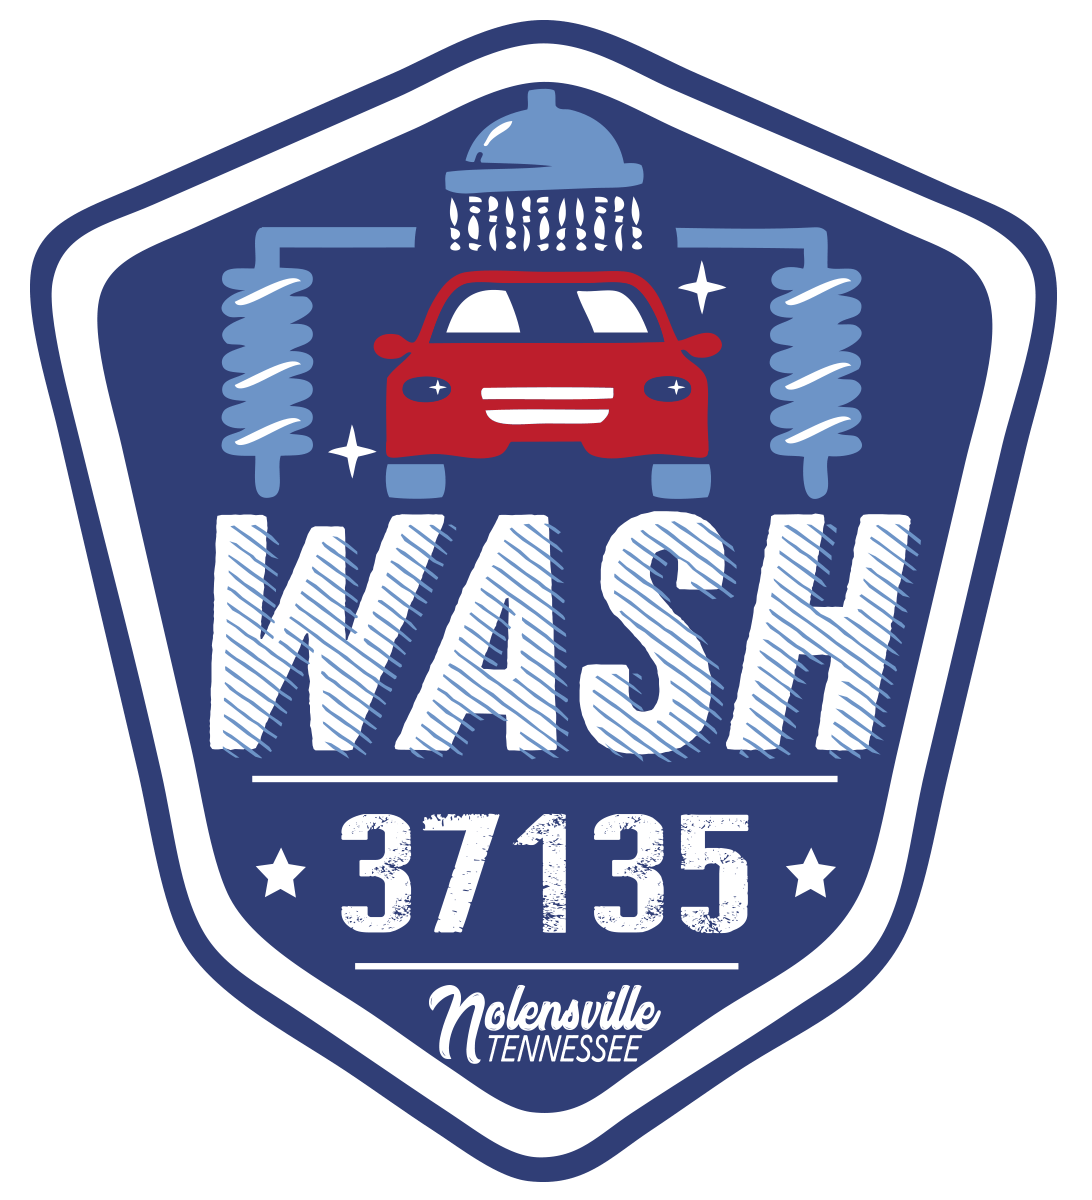 WASH 37135 LOGO ON 404 PAGE